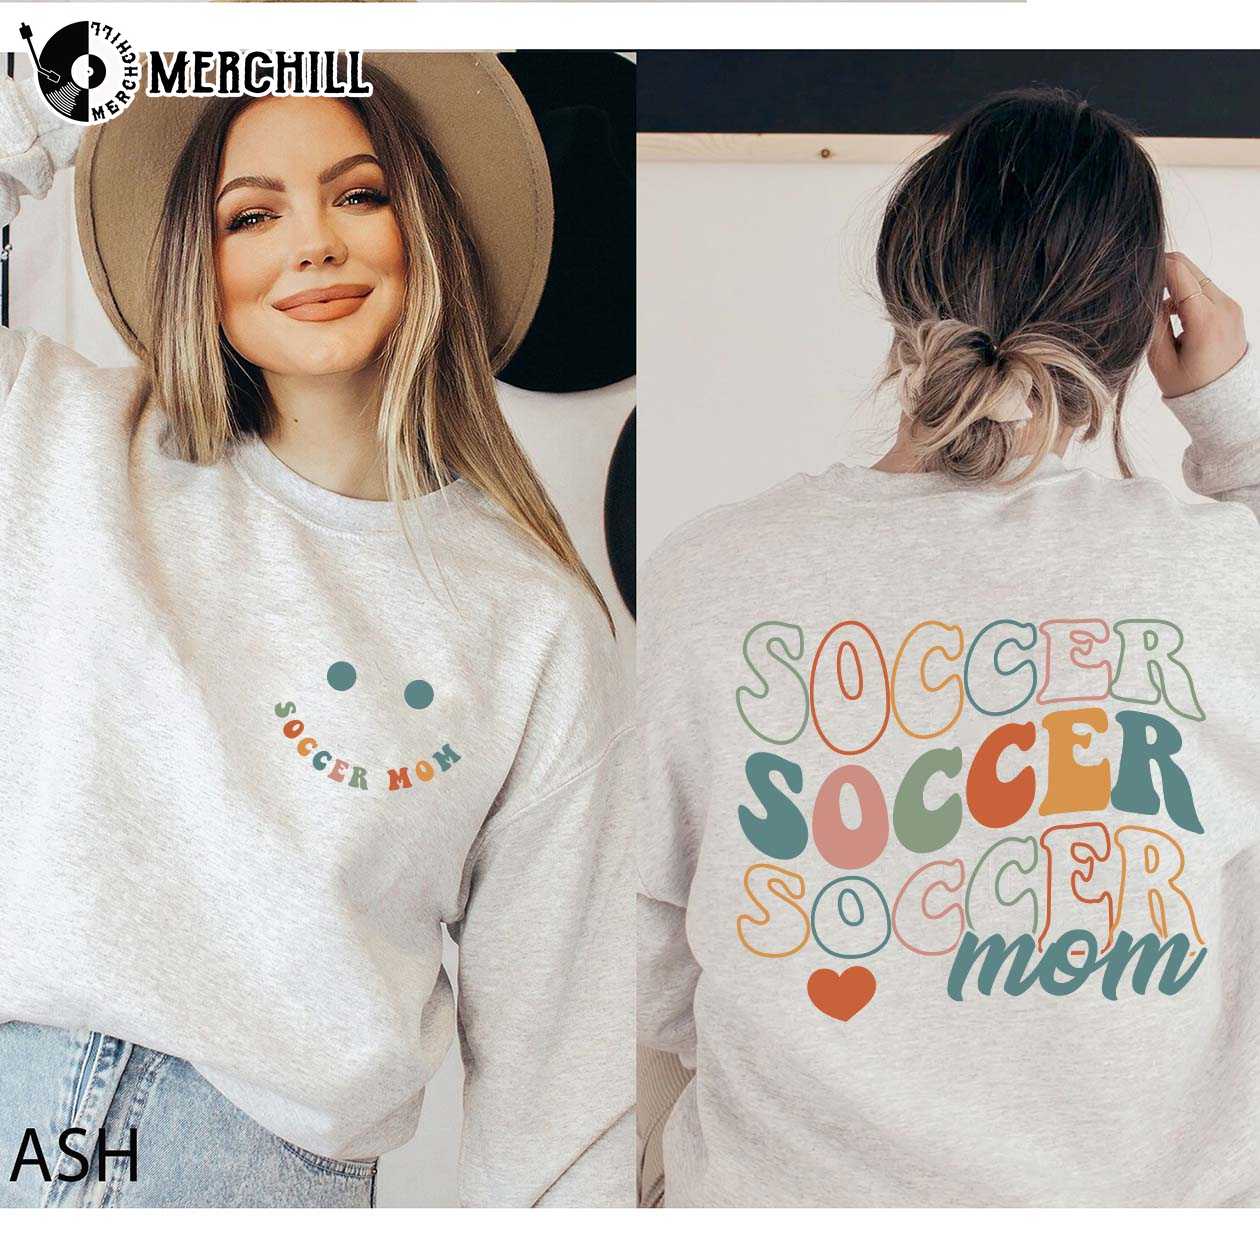 Smiley Face Soccer Mom Sweatshirt Funny Soccer Mom Shirts - Happy Place for  Music Lovers